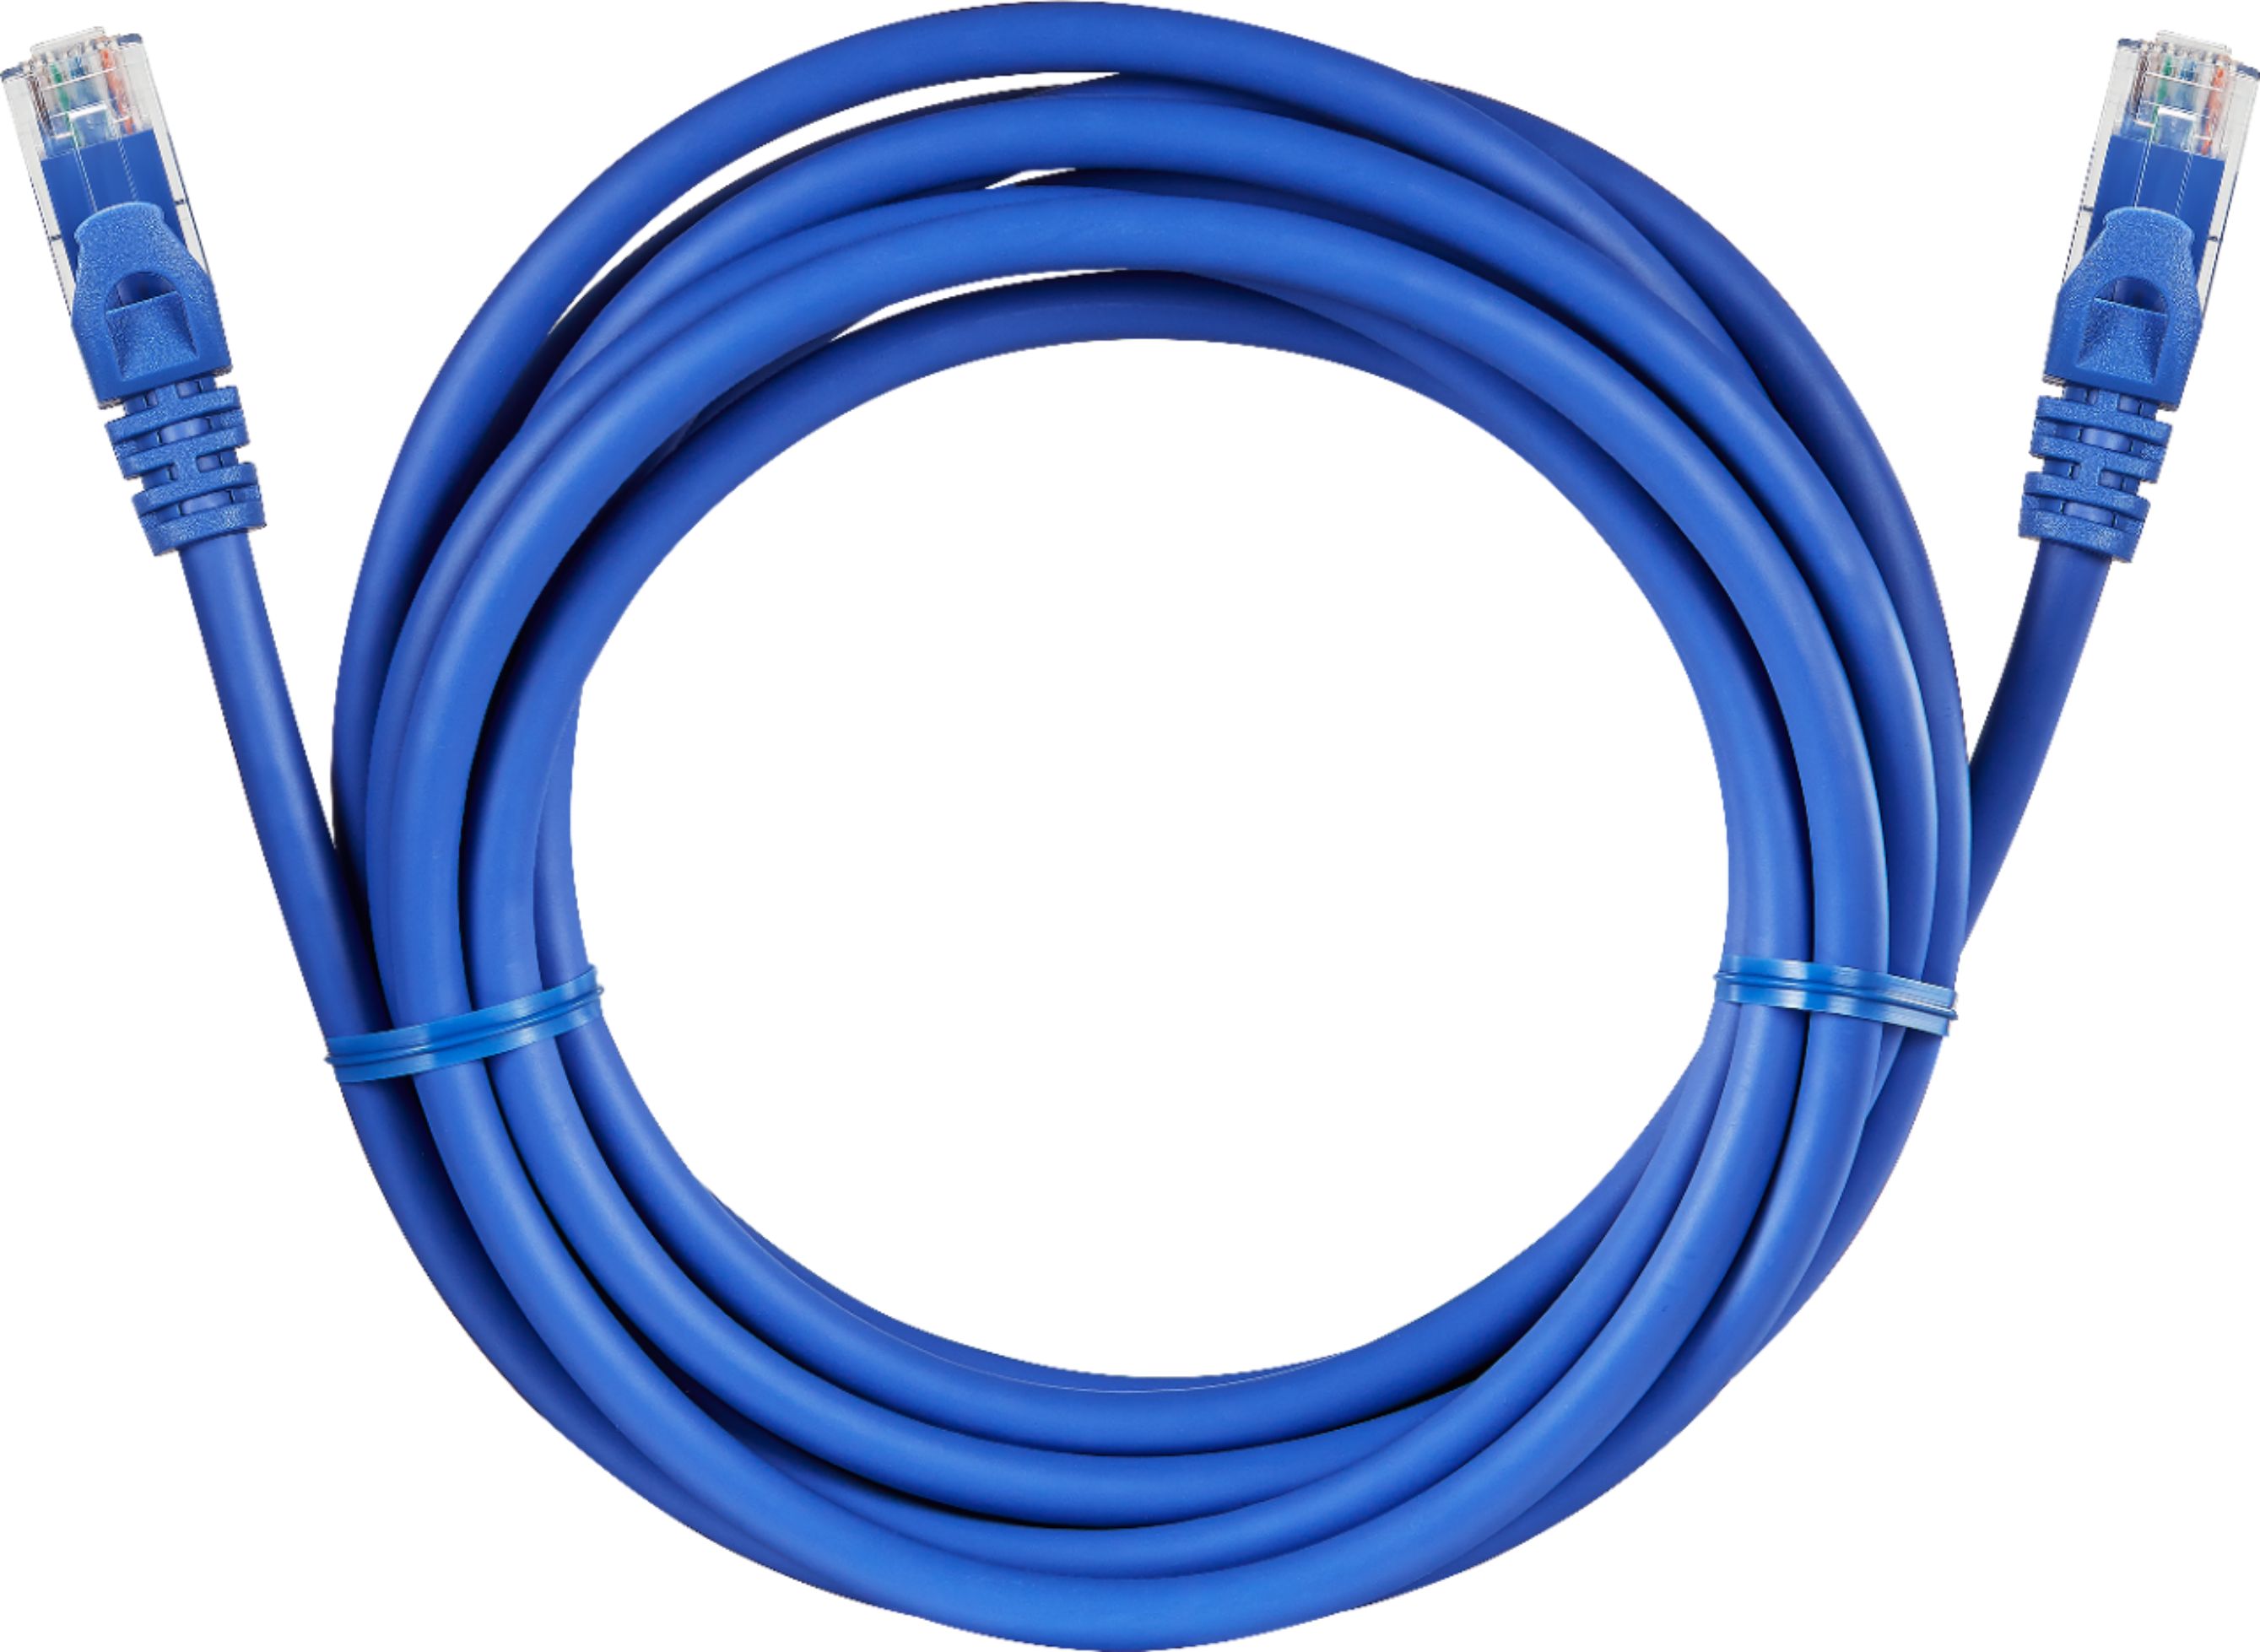 Generic Standard Ethernet Cable (10 Metre) - networkcable10m